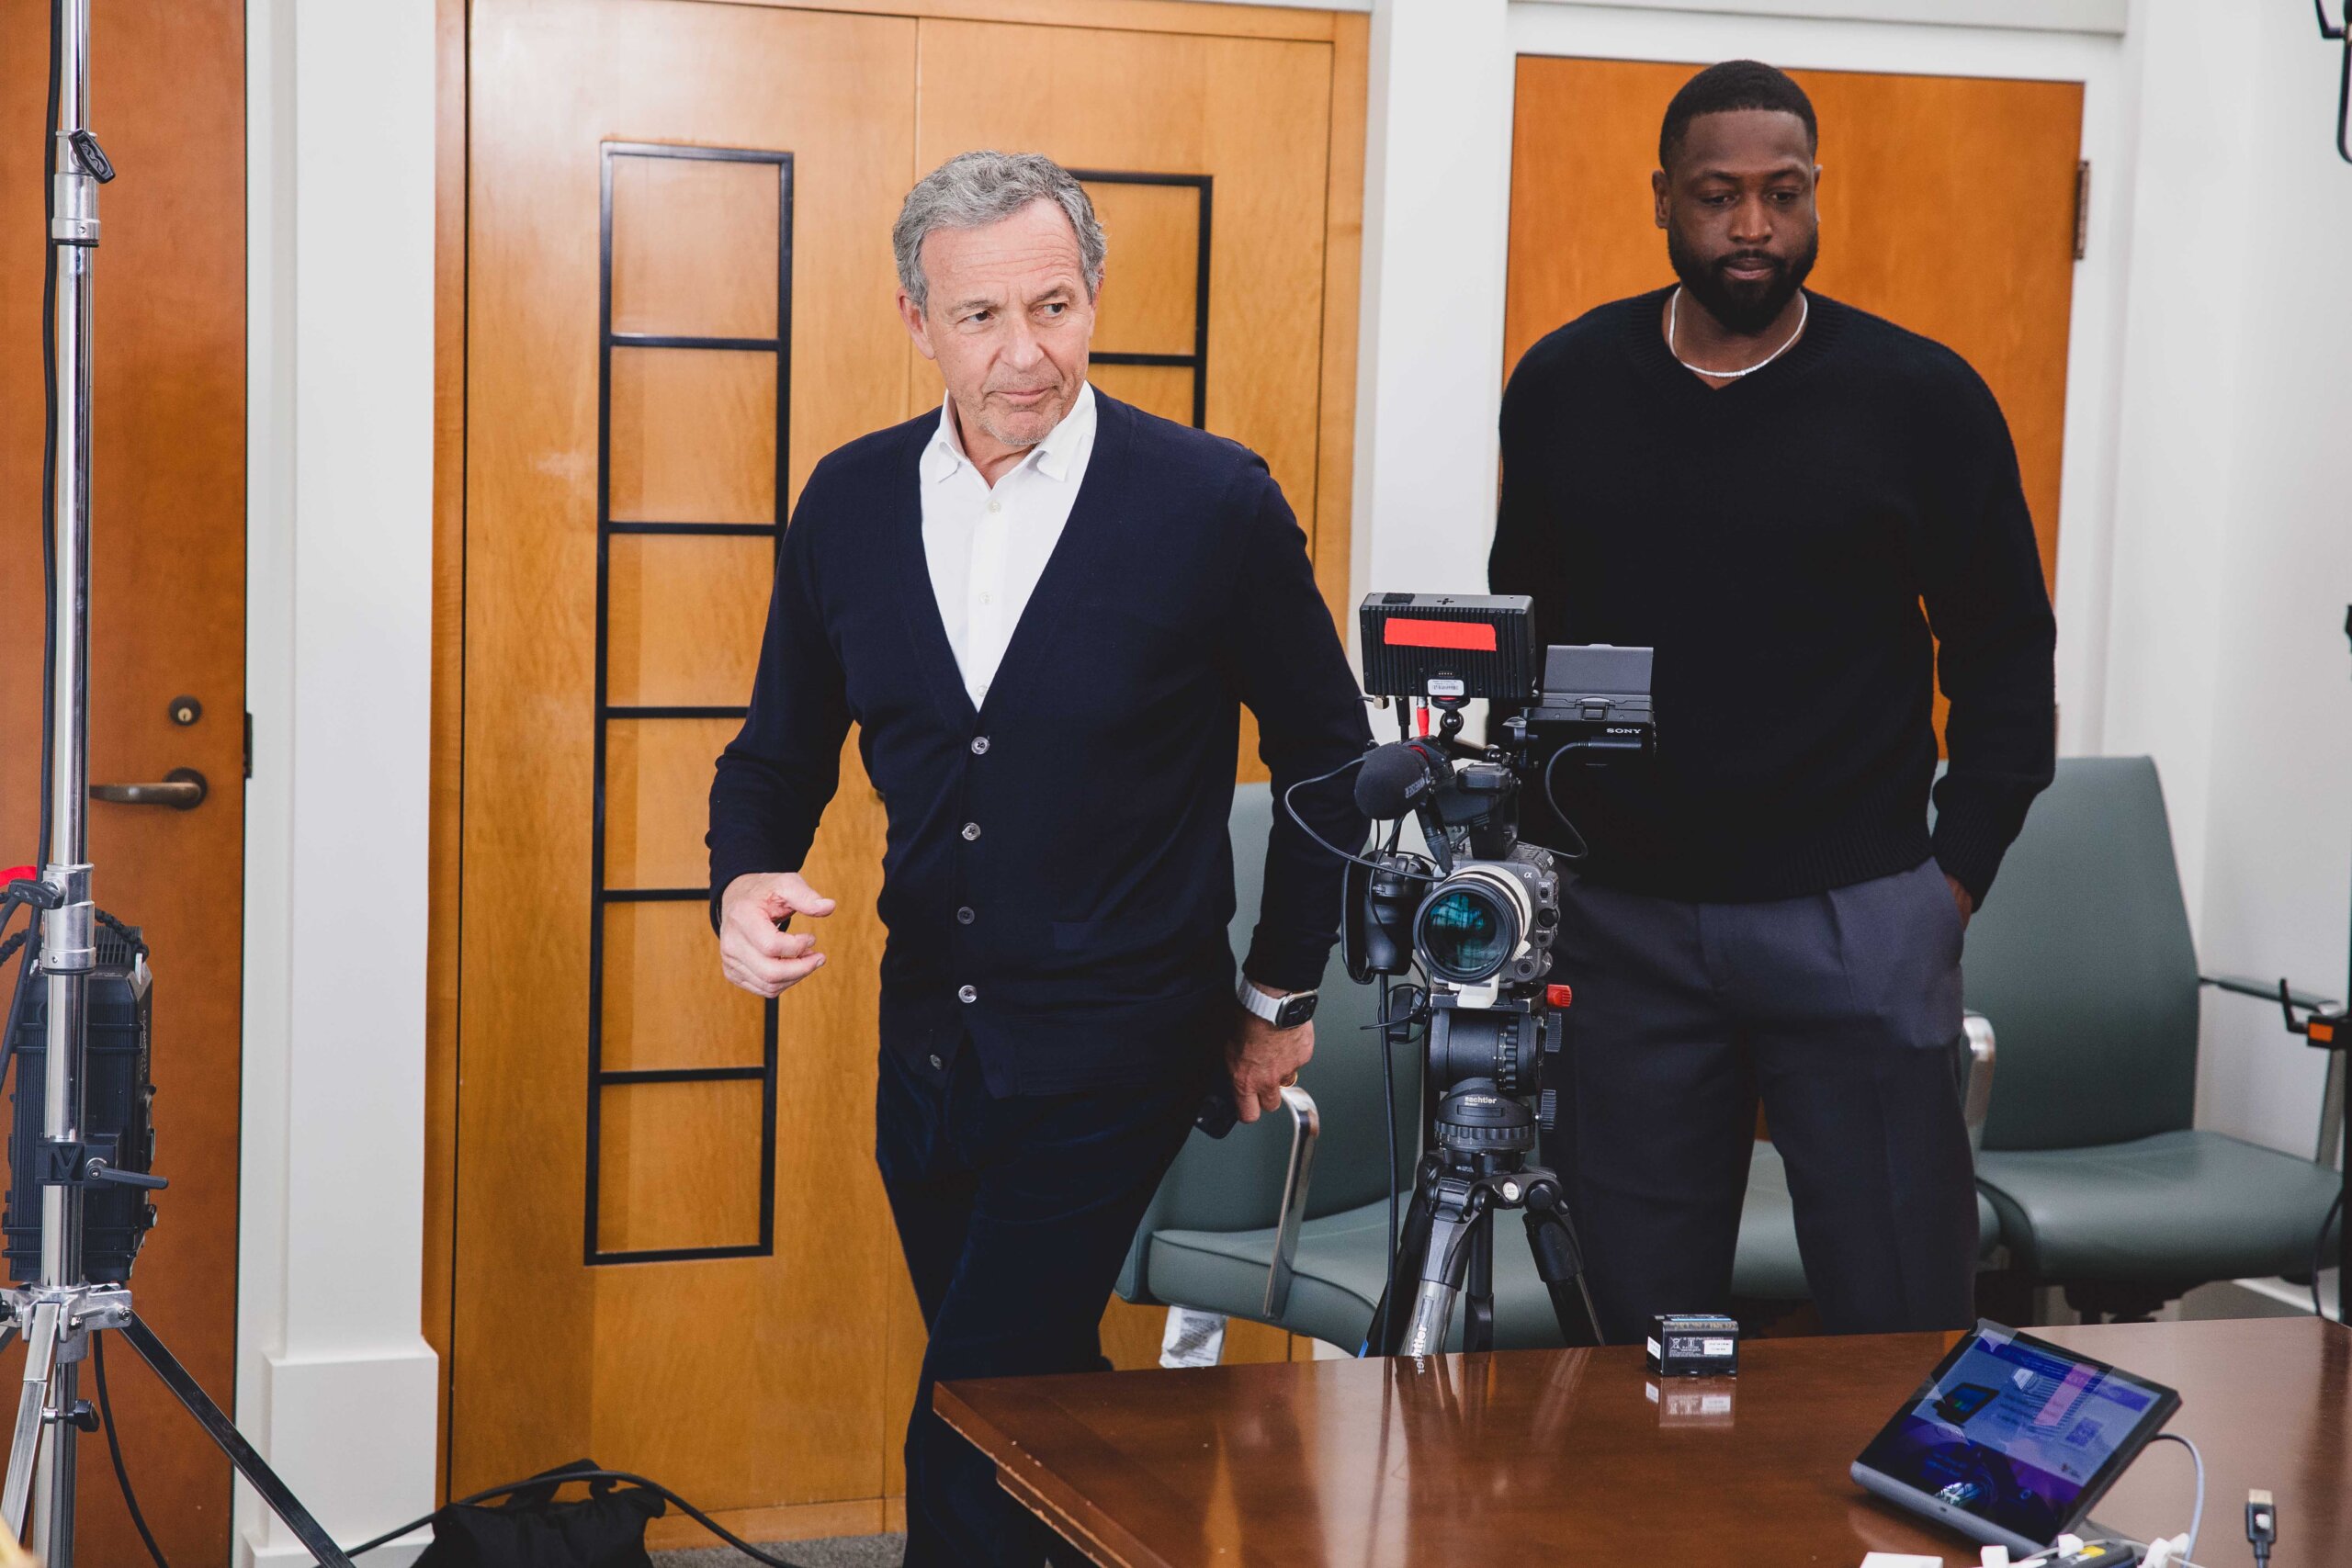 Disney CEO Bob Iger On “The Why With Dwyane Wade” Podcast